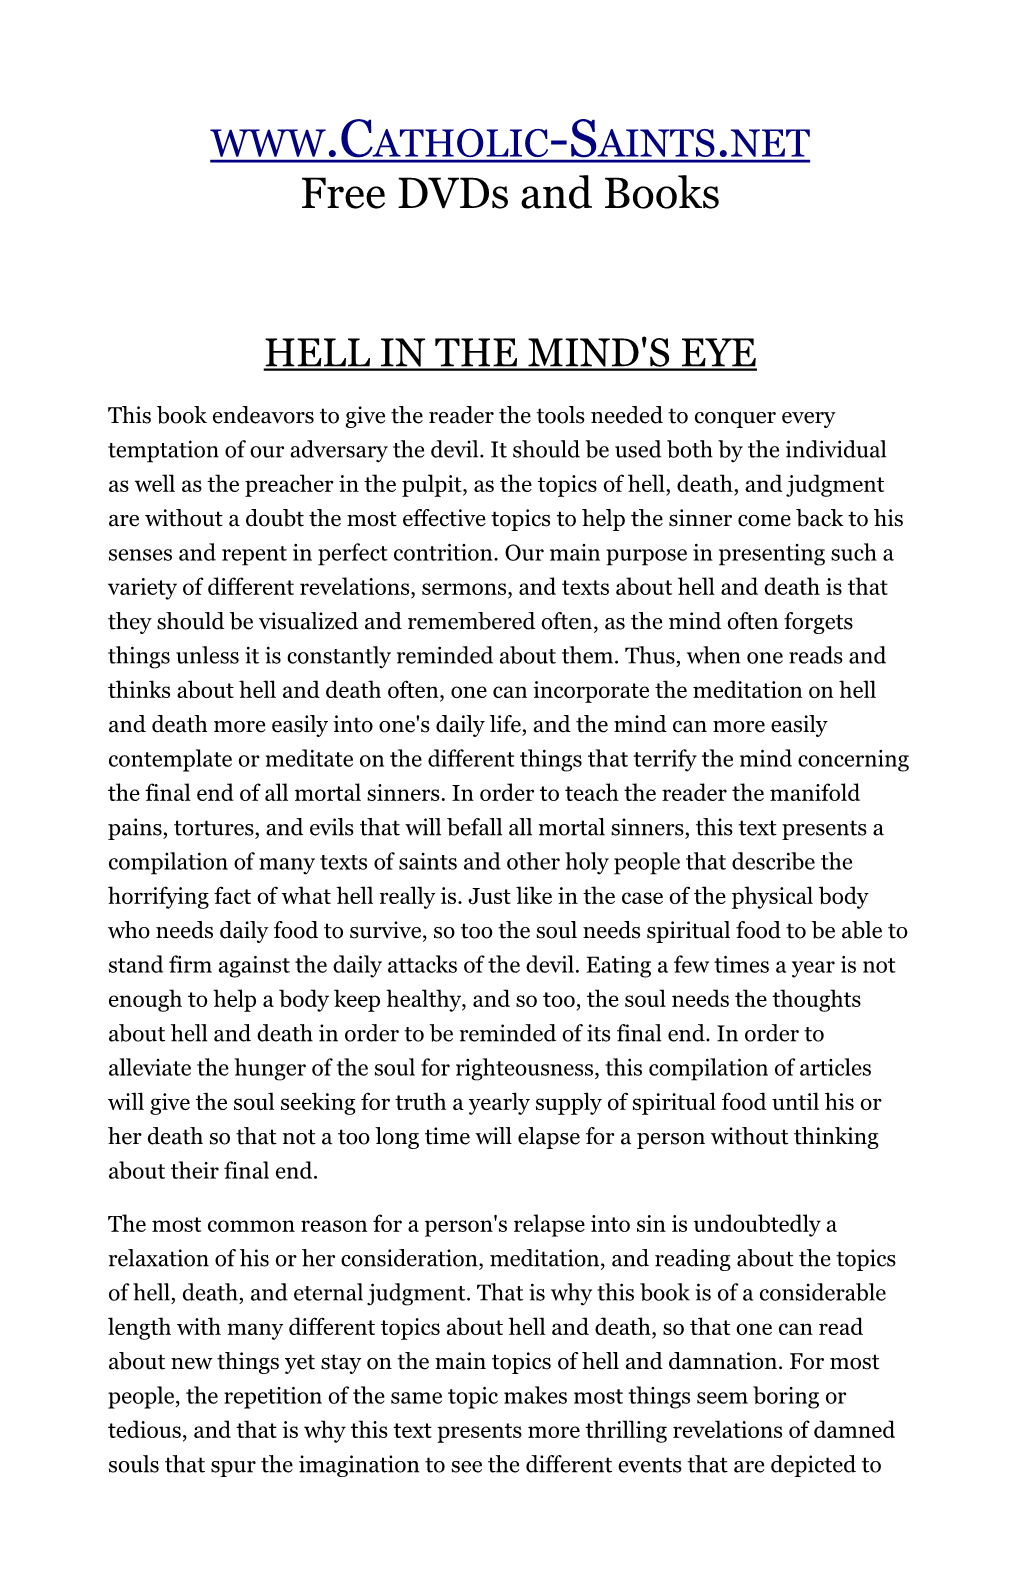 Hell in the Mind's Eye